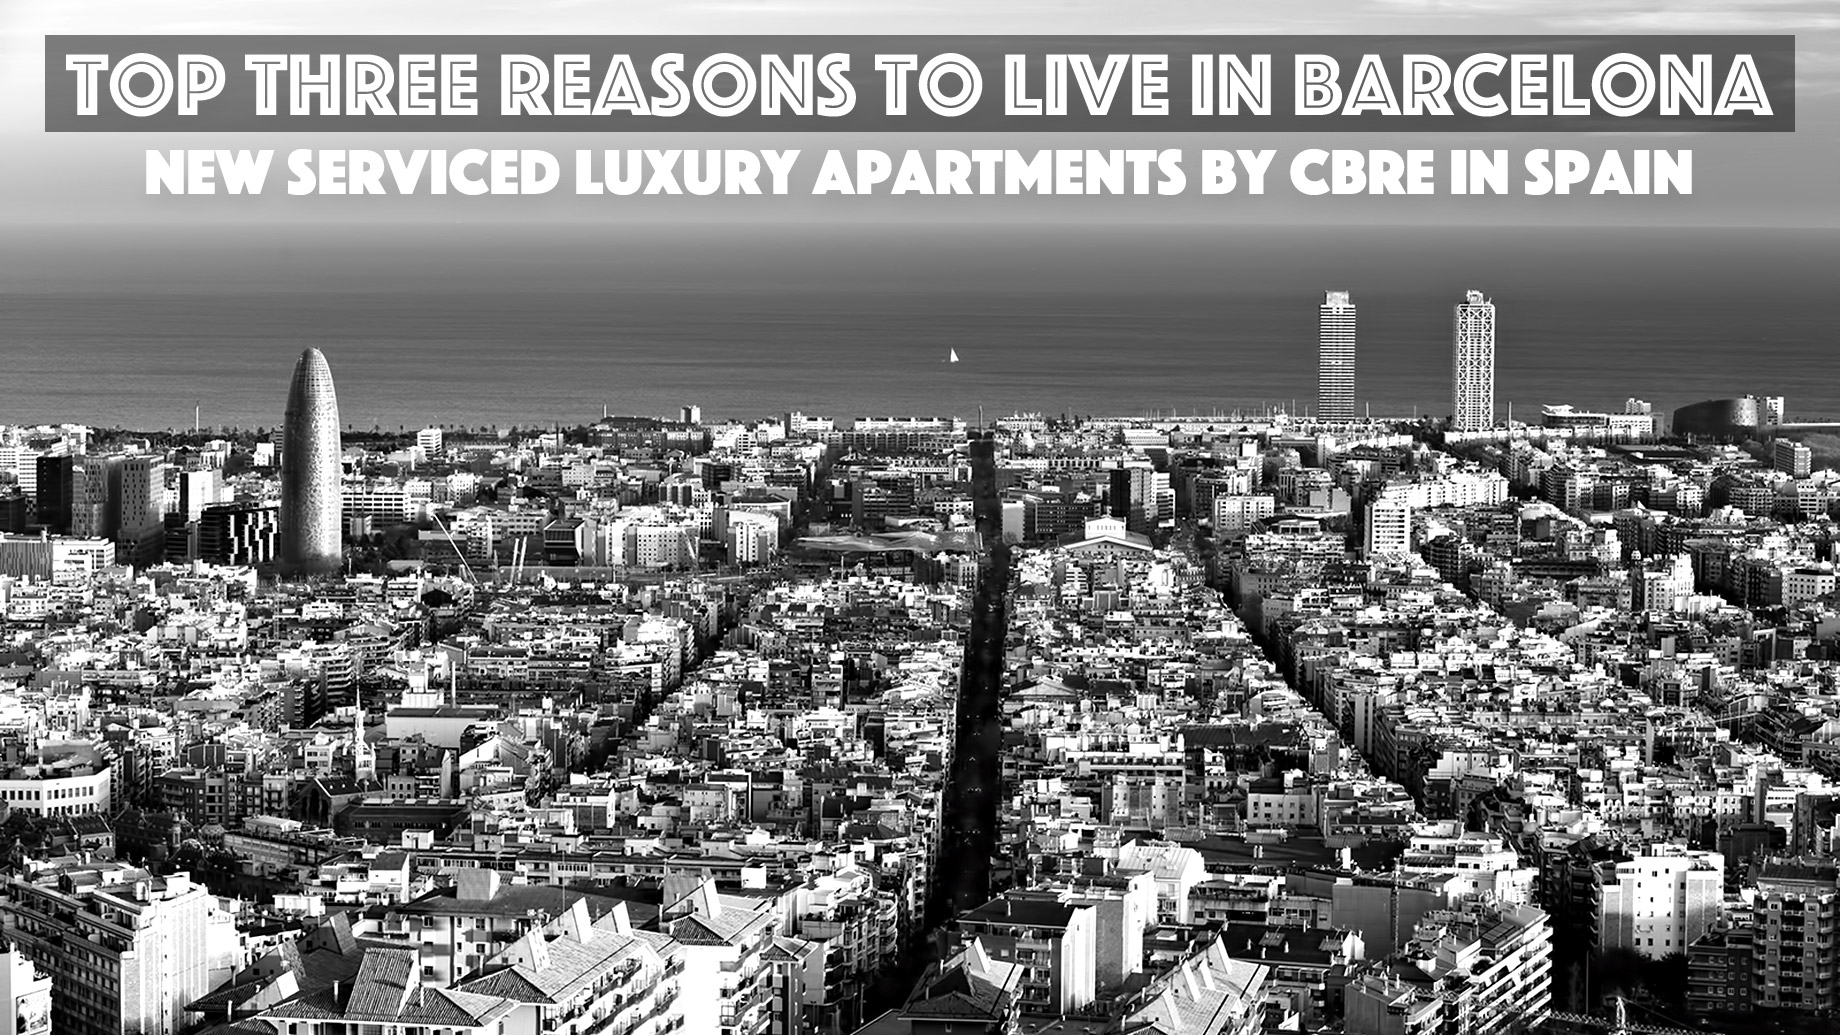 Top Three Reasons to Live in Barcelona – New Serviced Luxury Apartments by CBRE in Spain